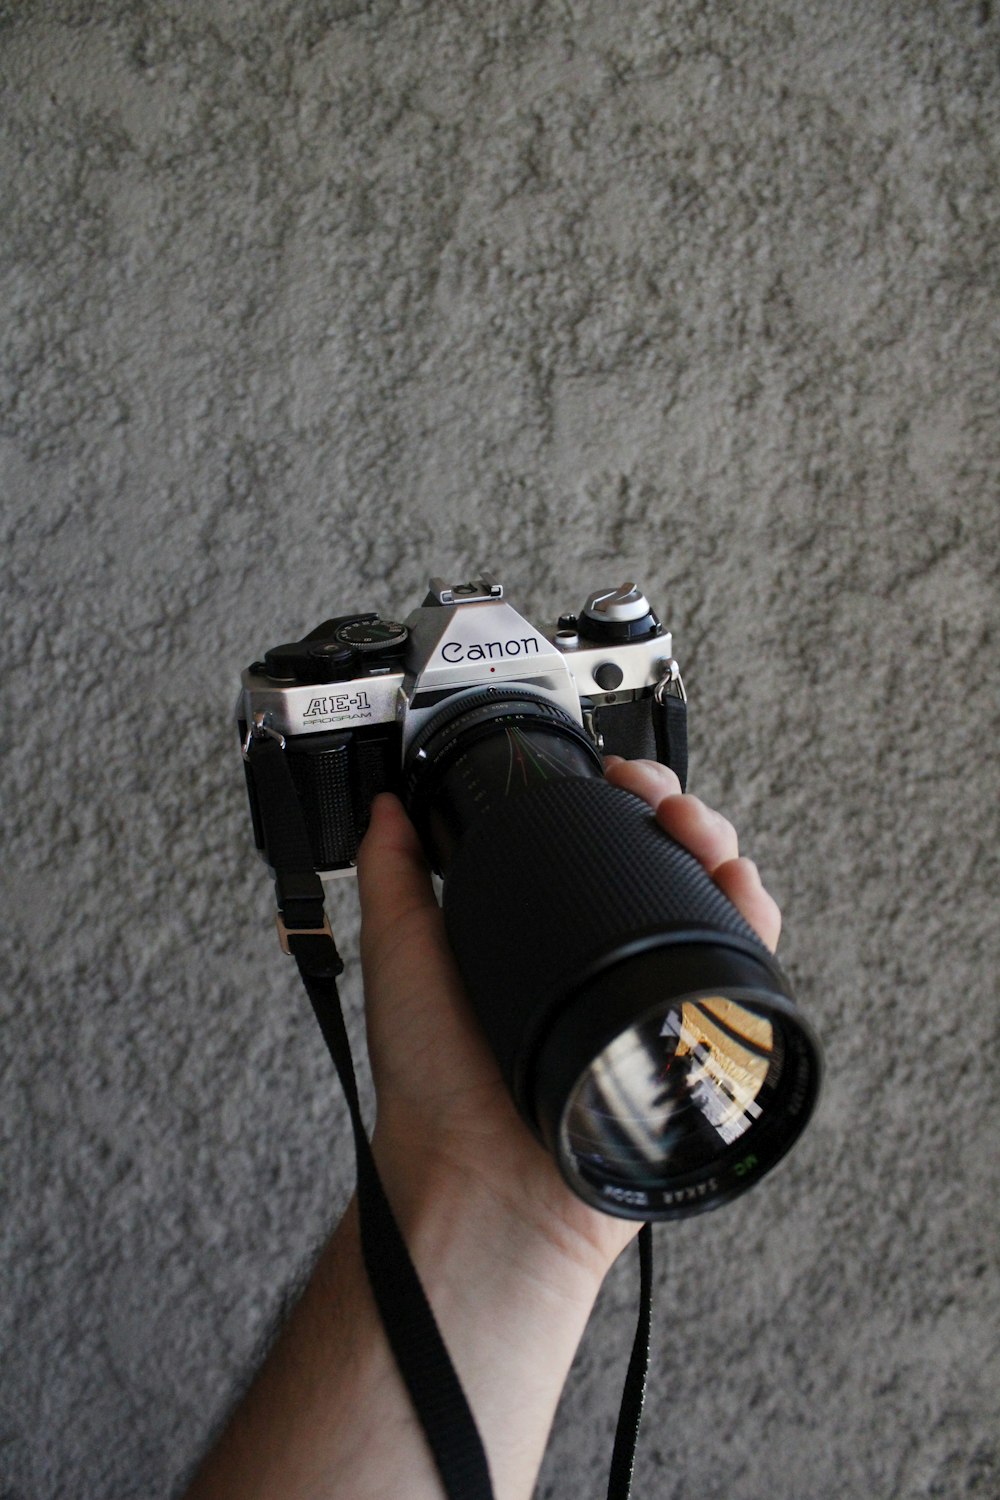 Hand holding a Canon AE1-Programm camera with a zoom lens